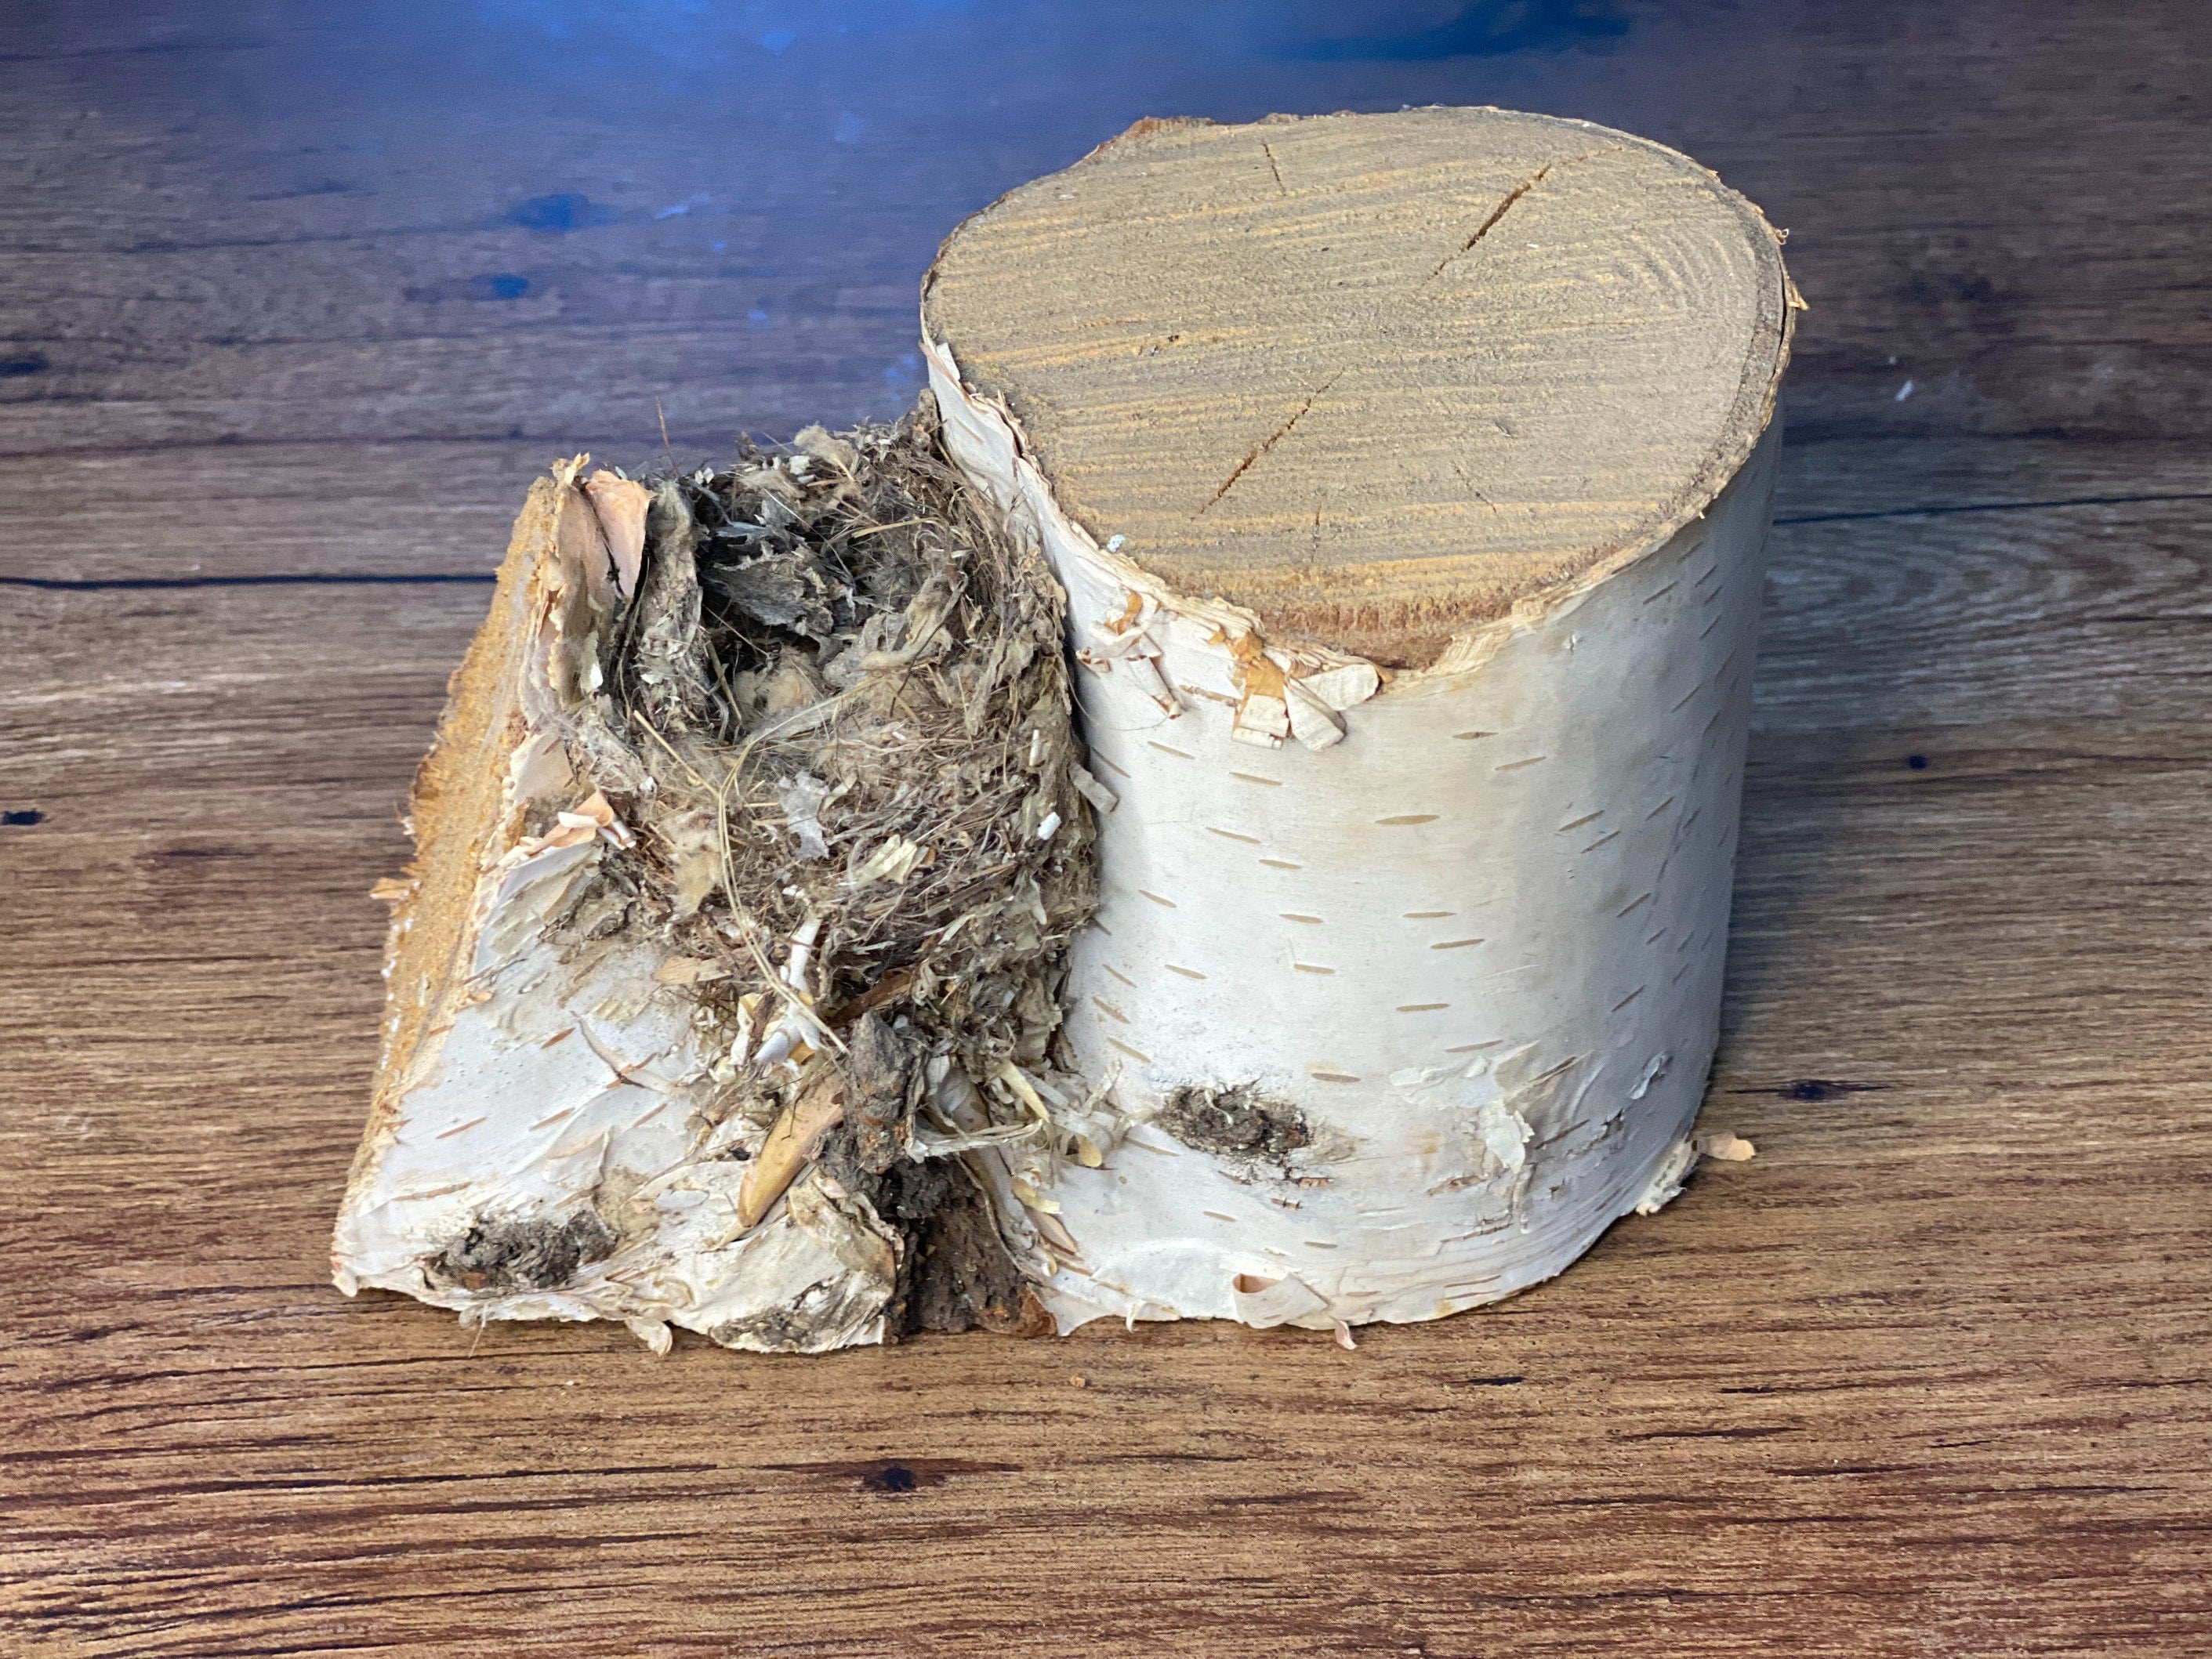 White Birch V-Shaped Log with Birds Nest, Approximately 6.5 Inches Long by 4 Inches Wide, 4 Inches Thick